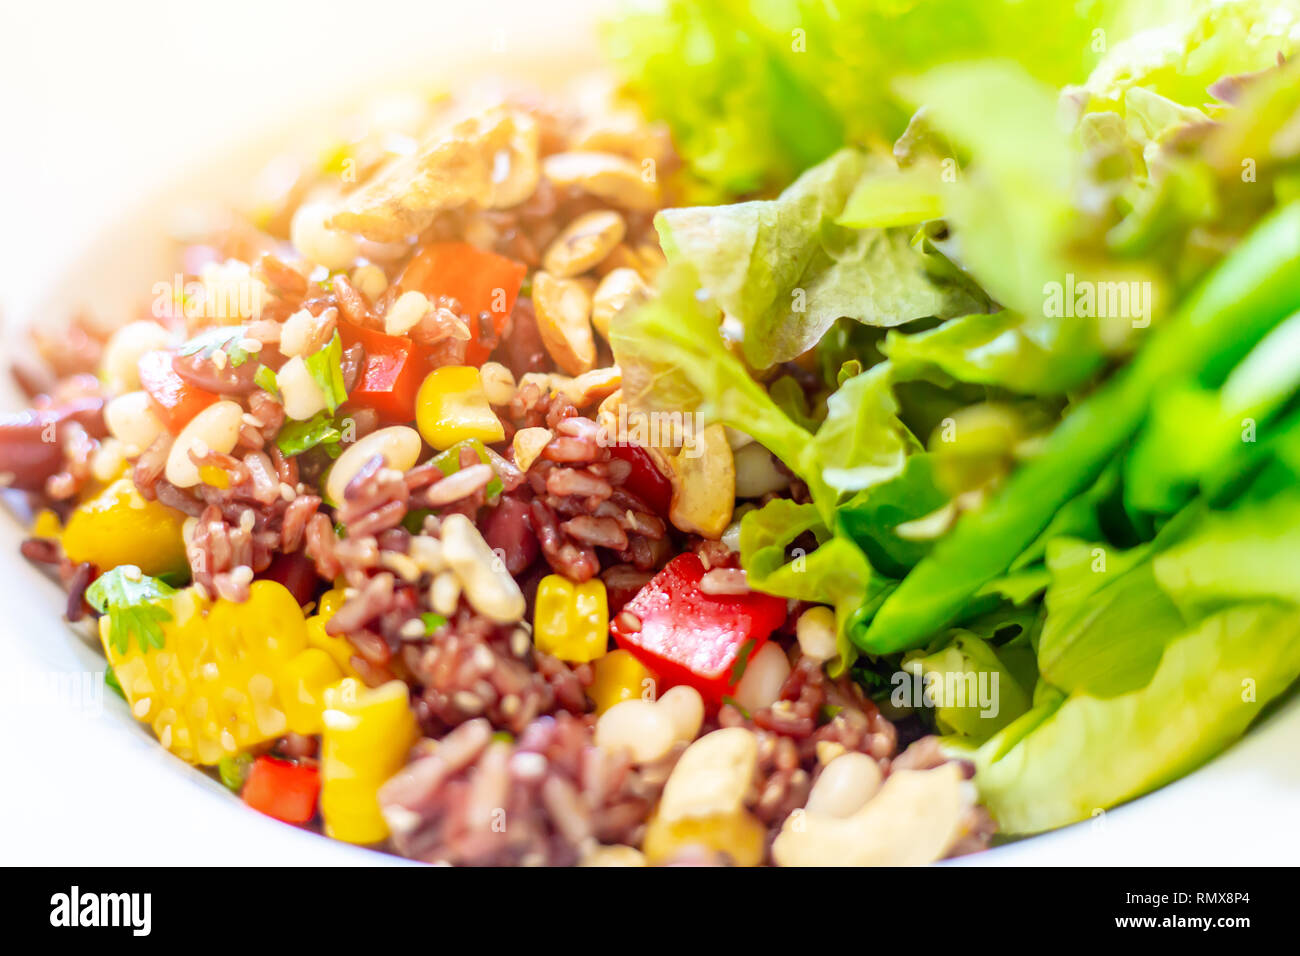 vegetarian food, fried black rice vegetables mix with salad. Stock Photo